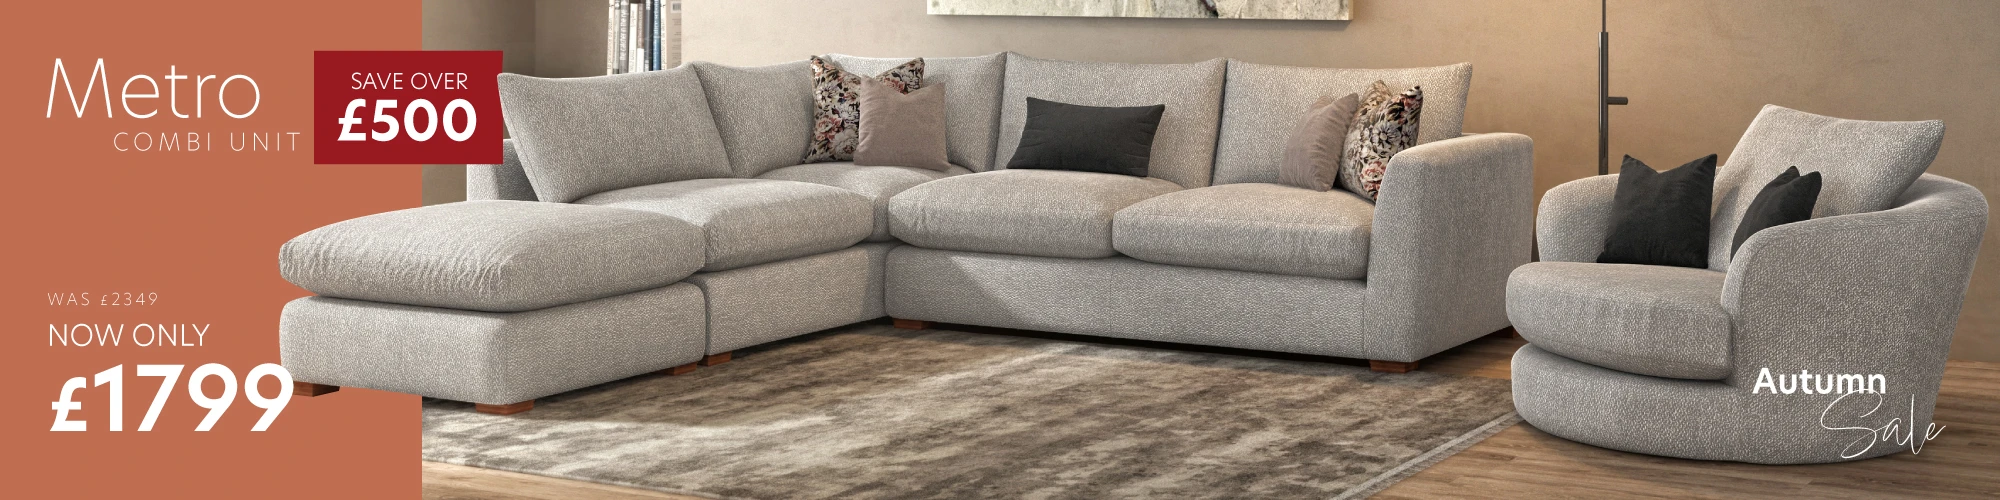 Dfs corner sofa for sale for Sale, Sofas, Couches & Armchairs